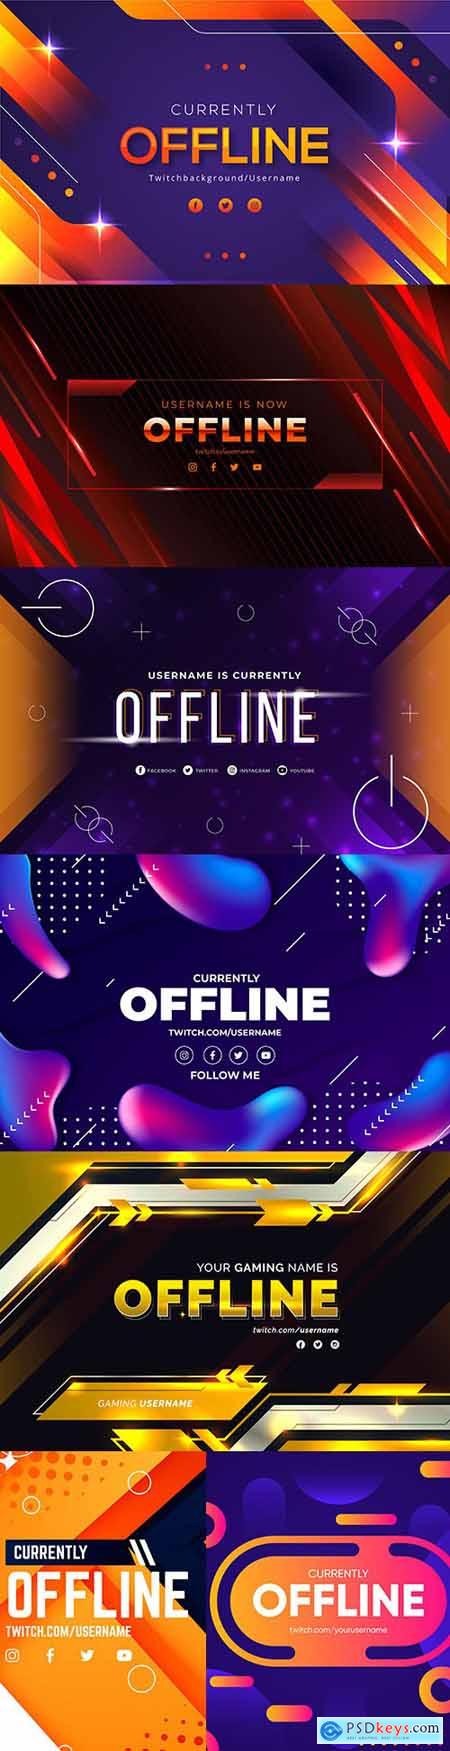 Offline banner abstract design in different styles